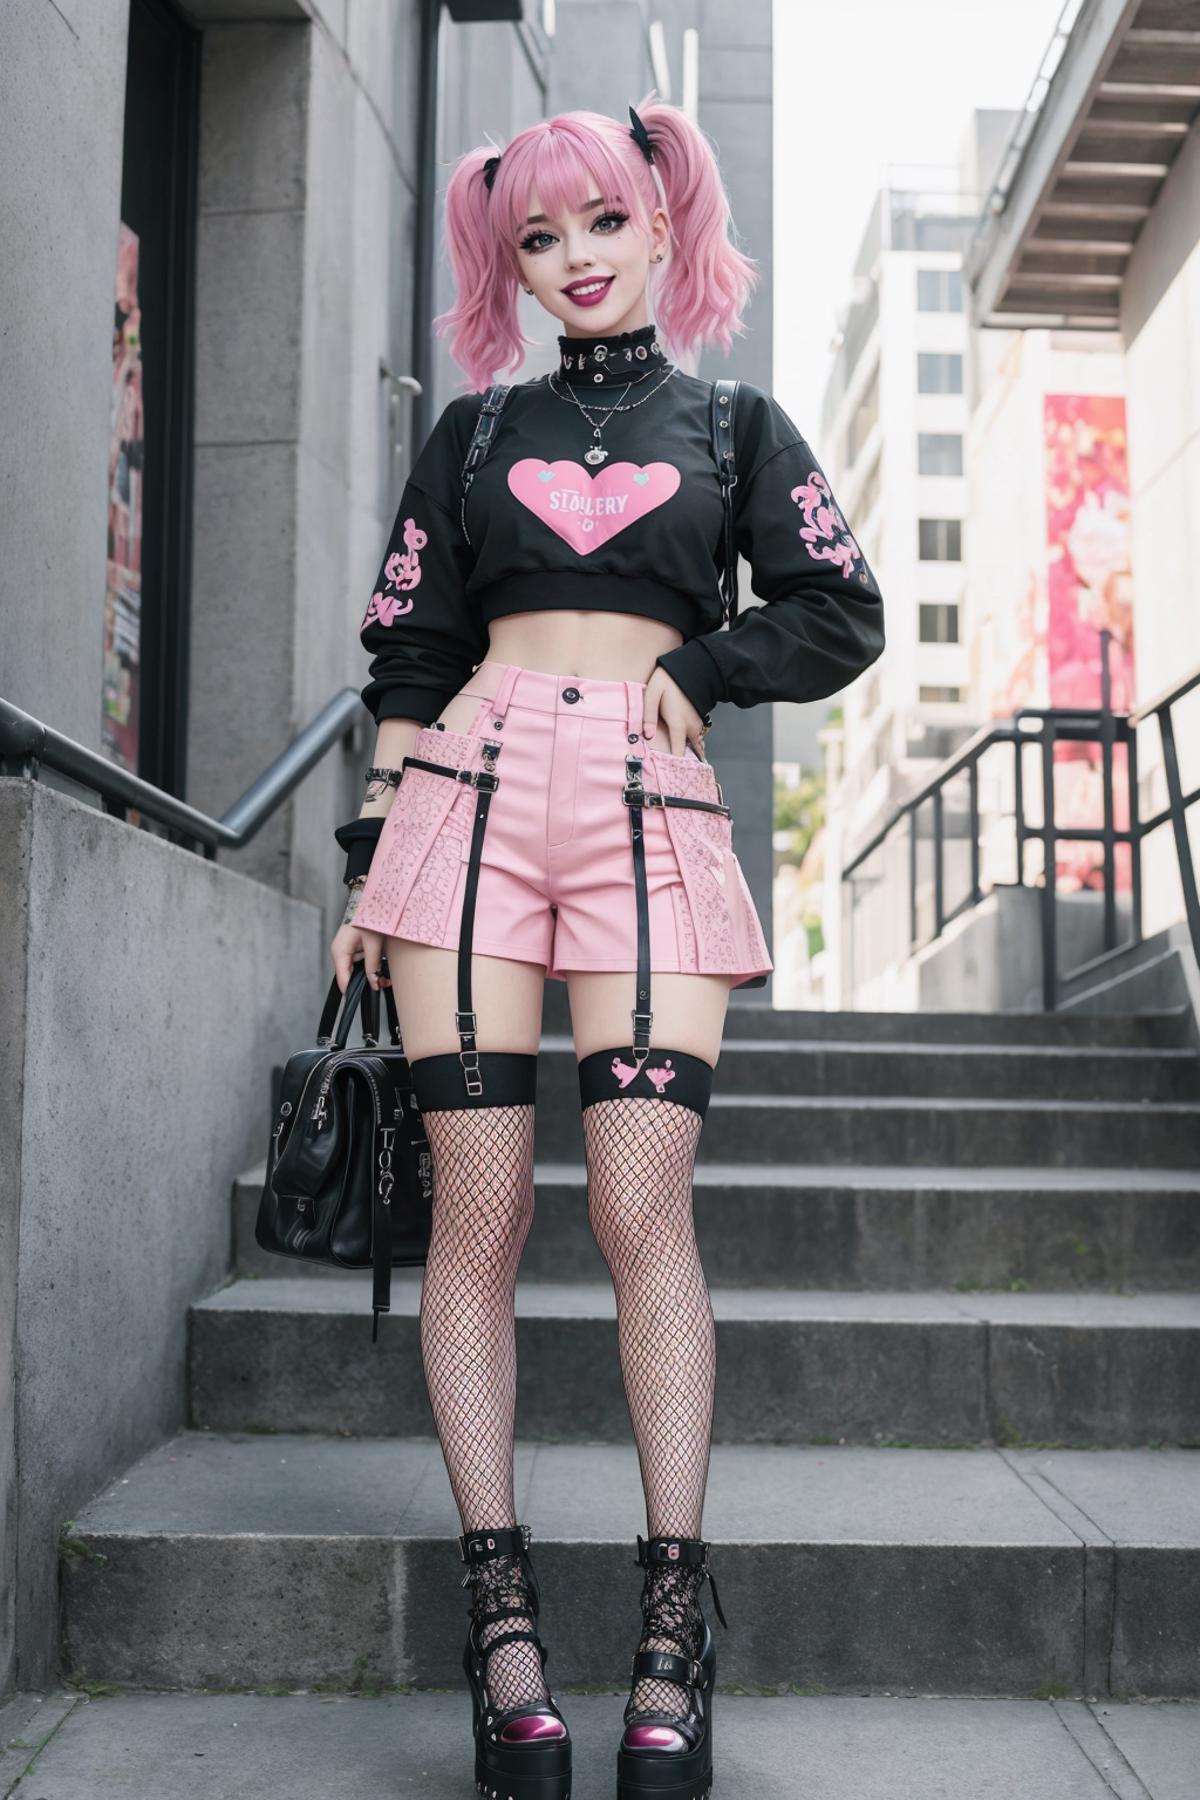 Pastel Goth - by EDG image by EDG